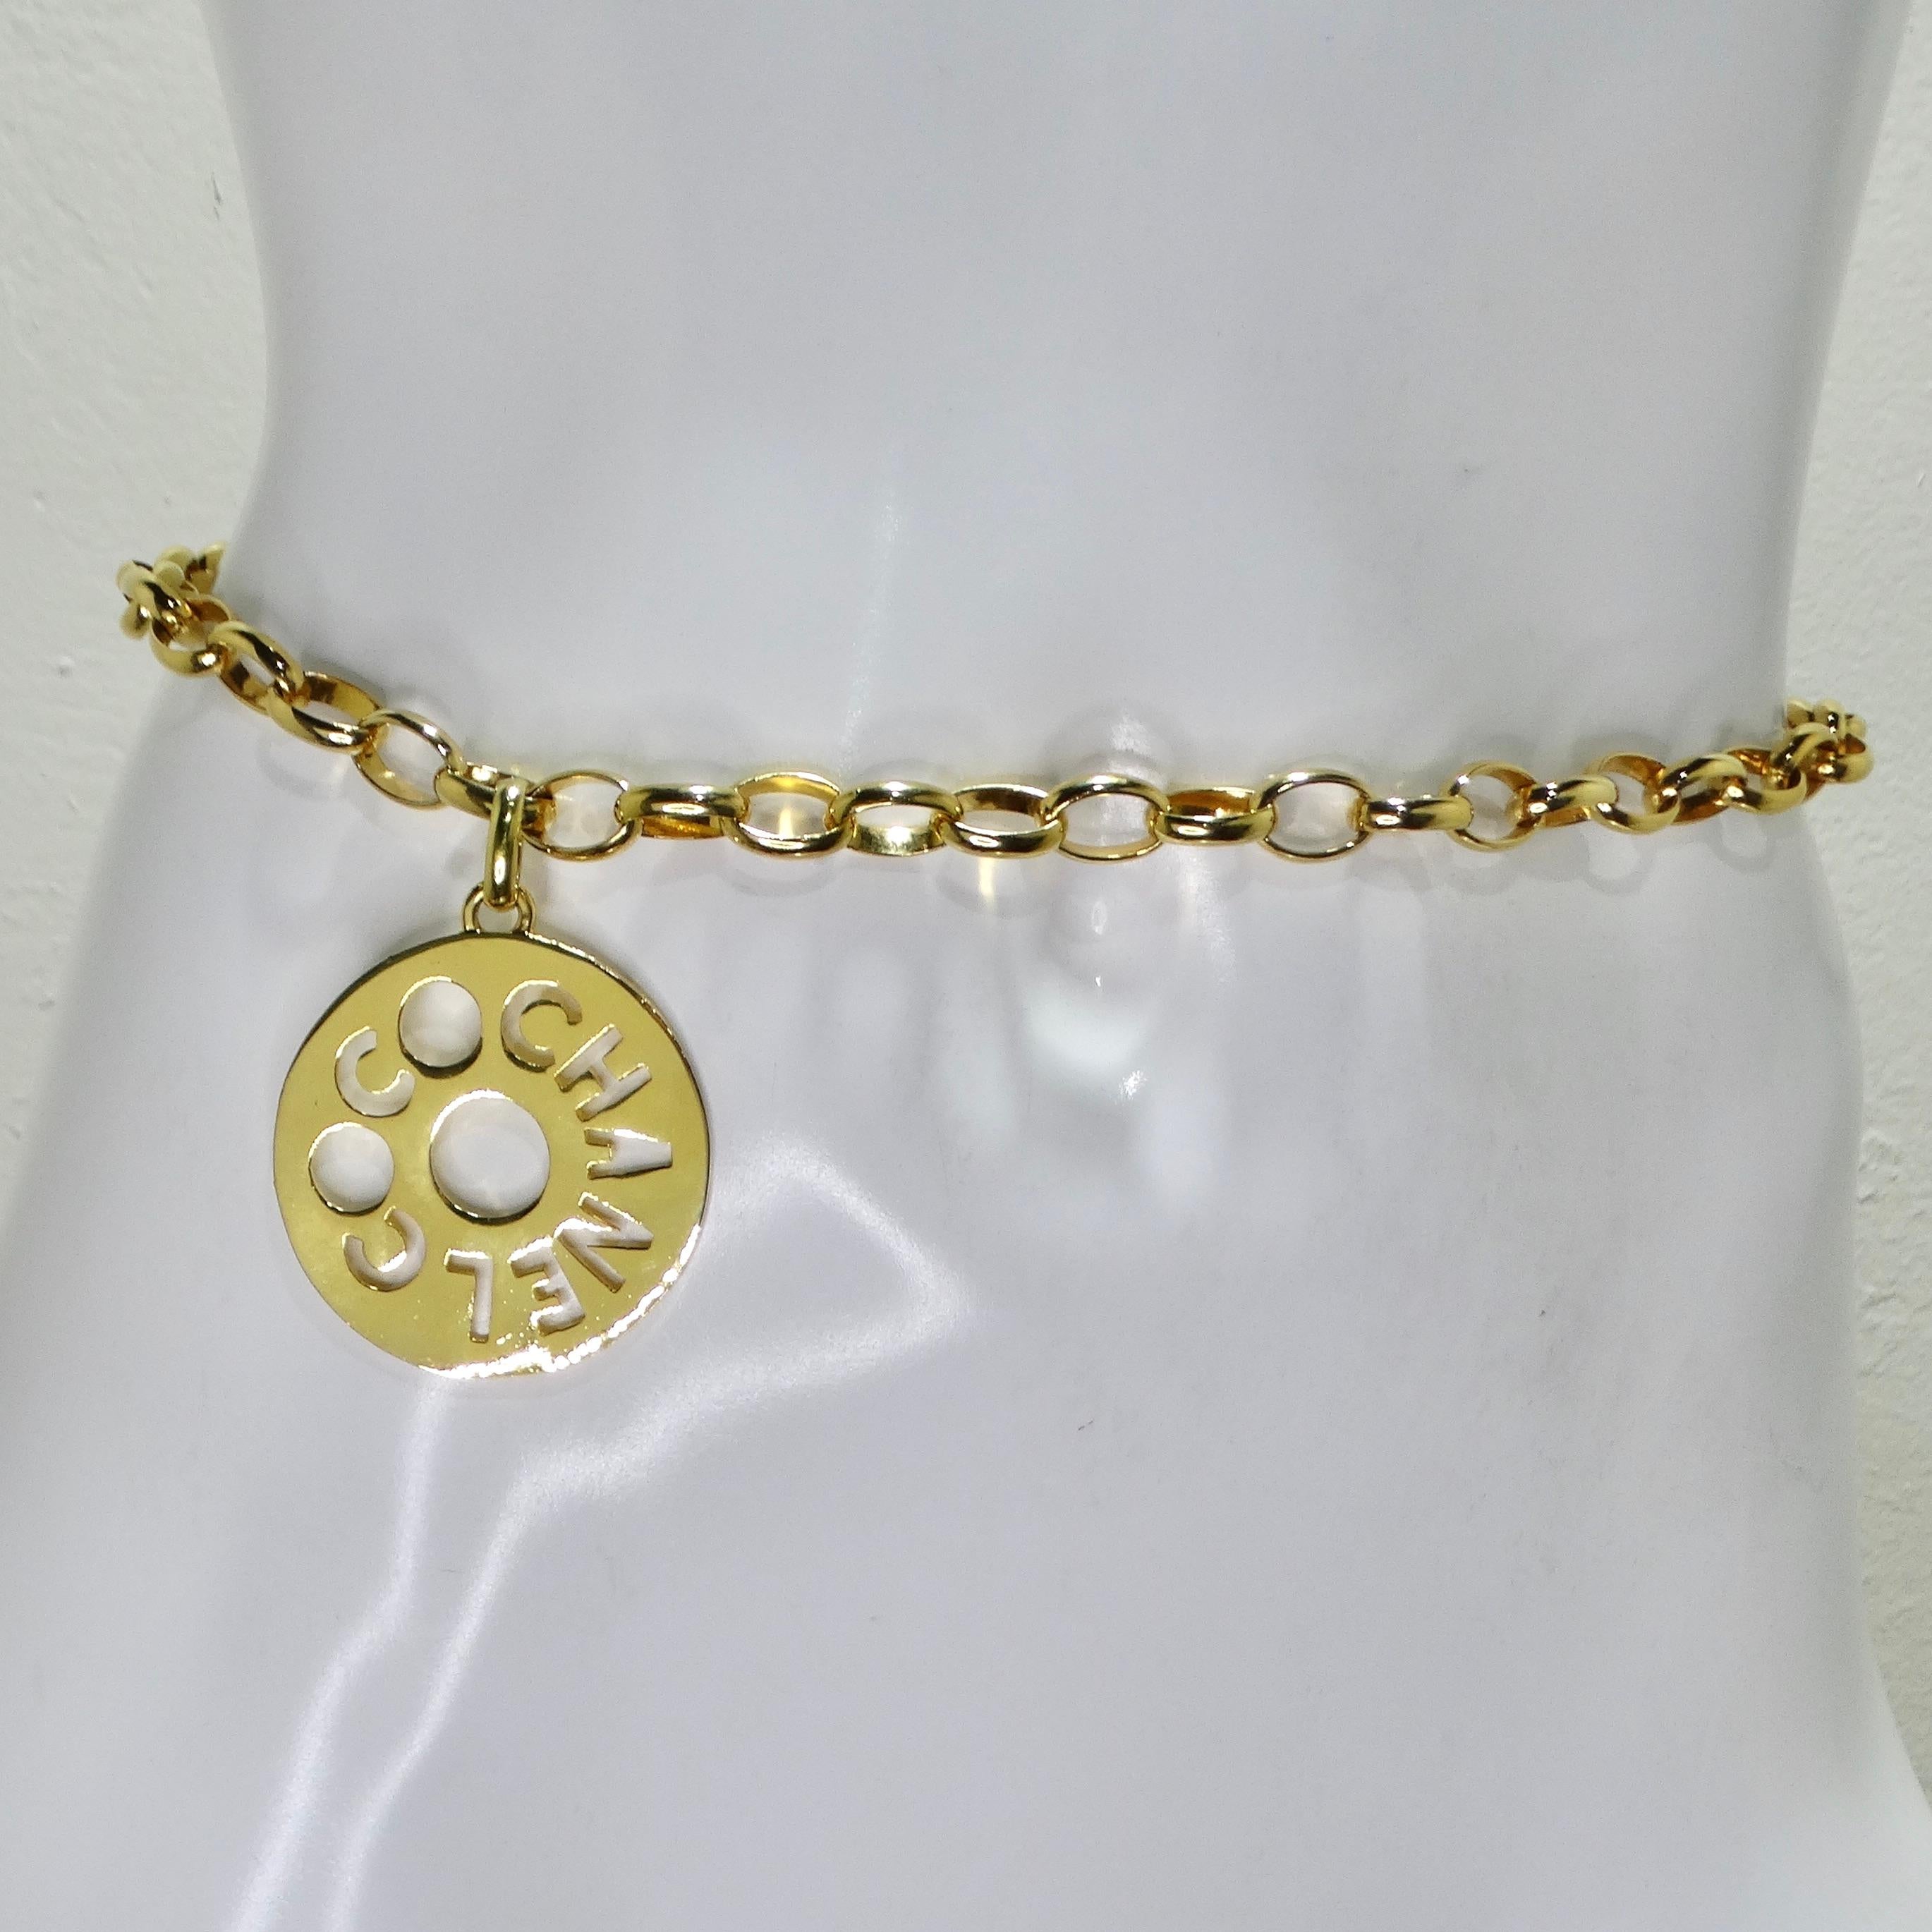 Chanel 1970s Gold Tone Oversize Pendant Necklace In Good Condition For Sale In Scottsdale, AZ